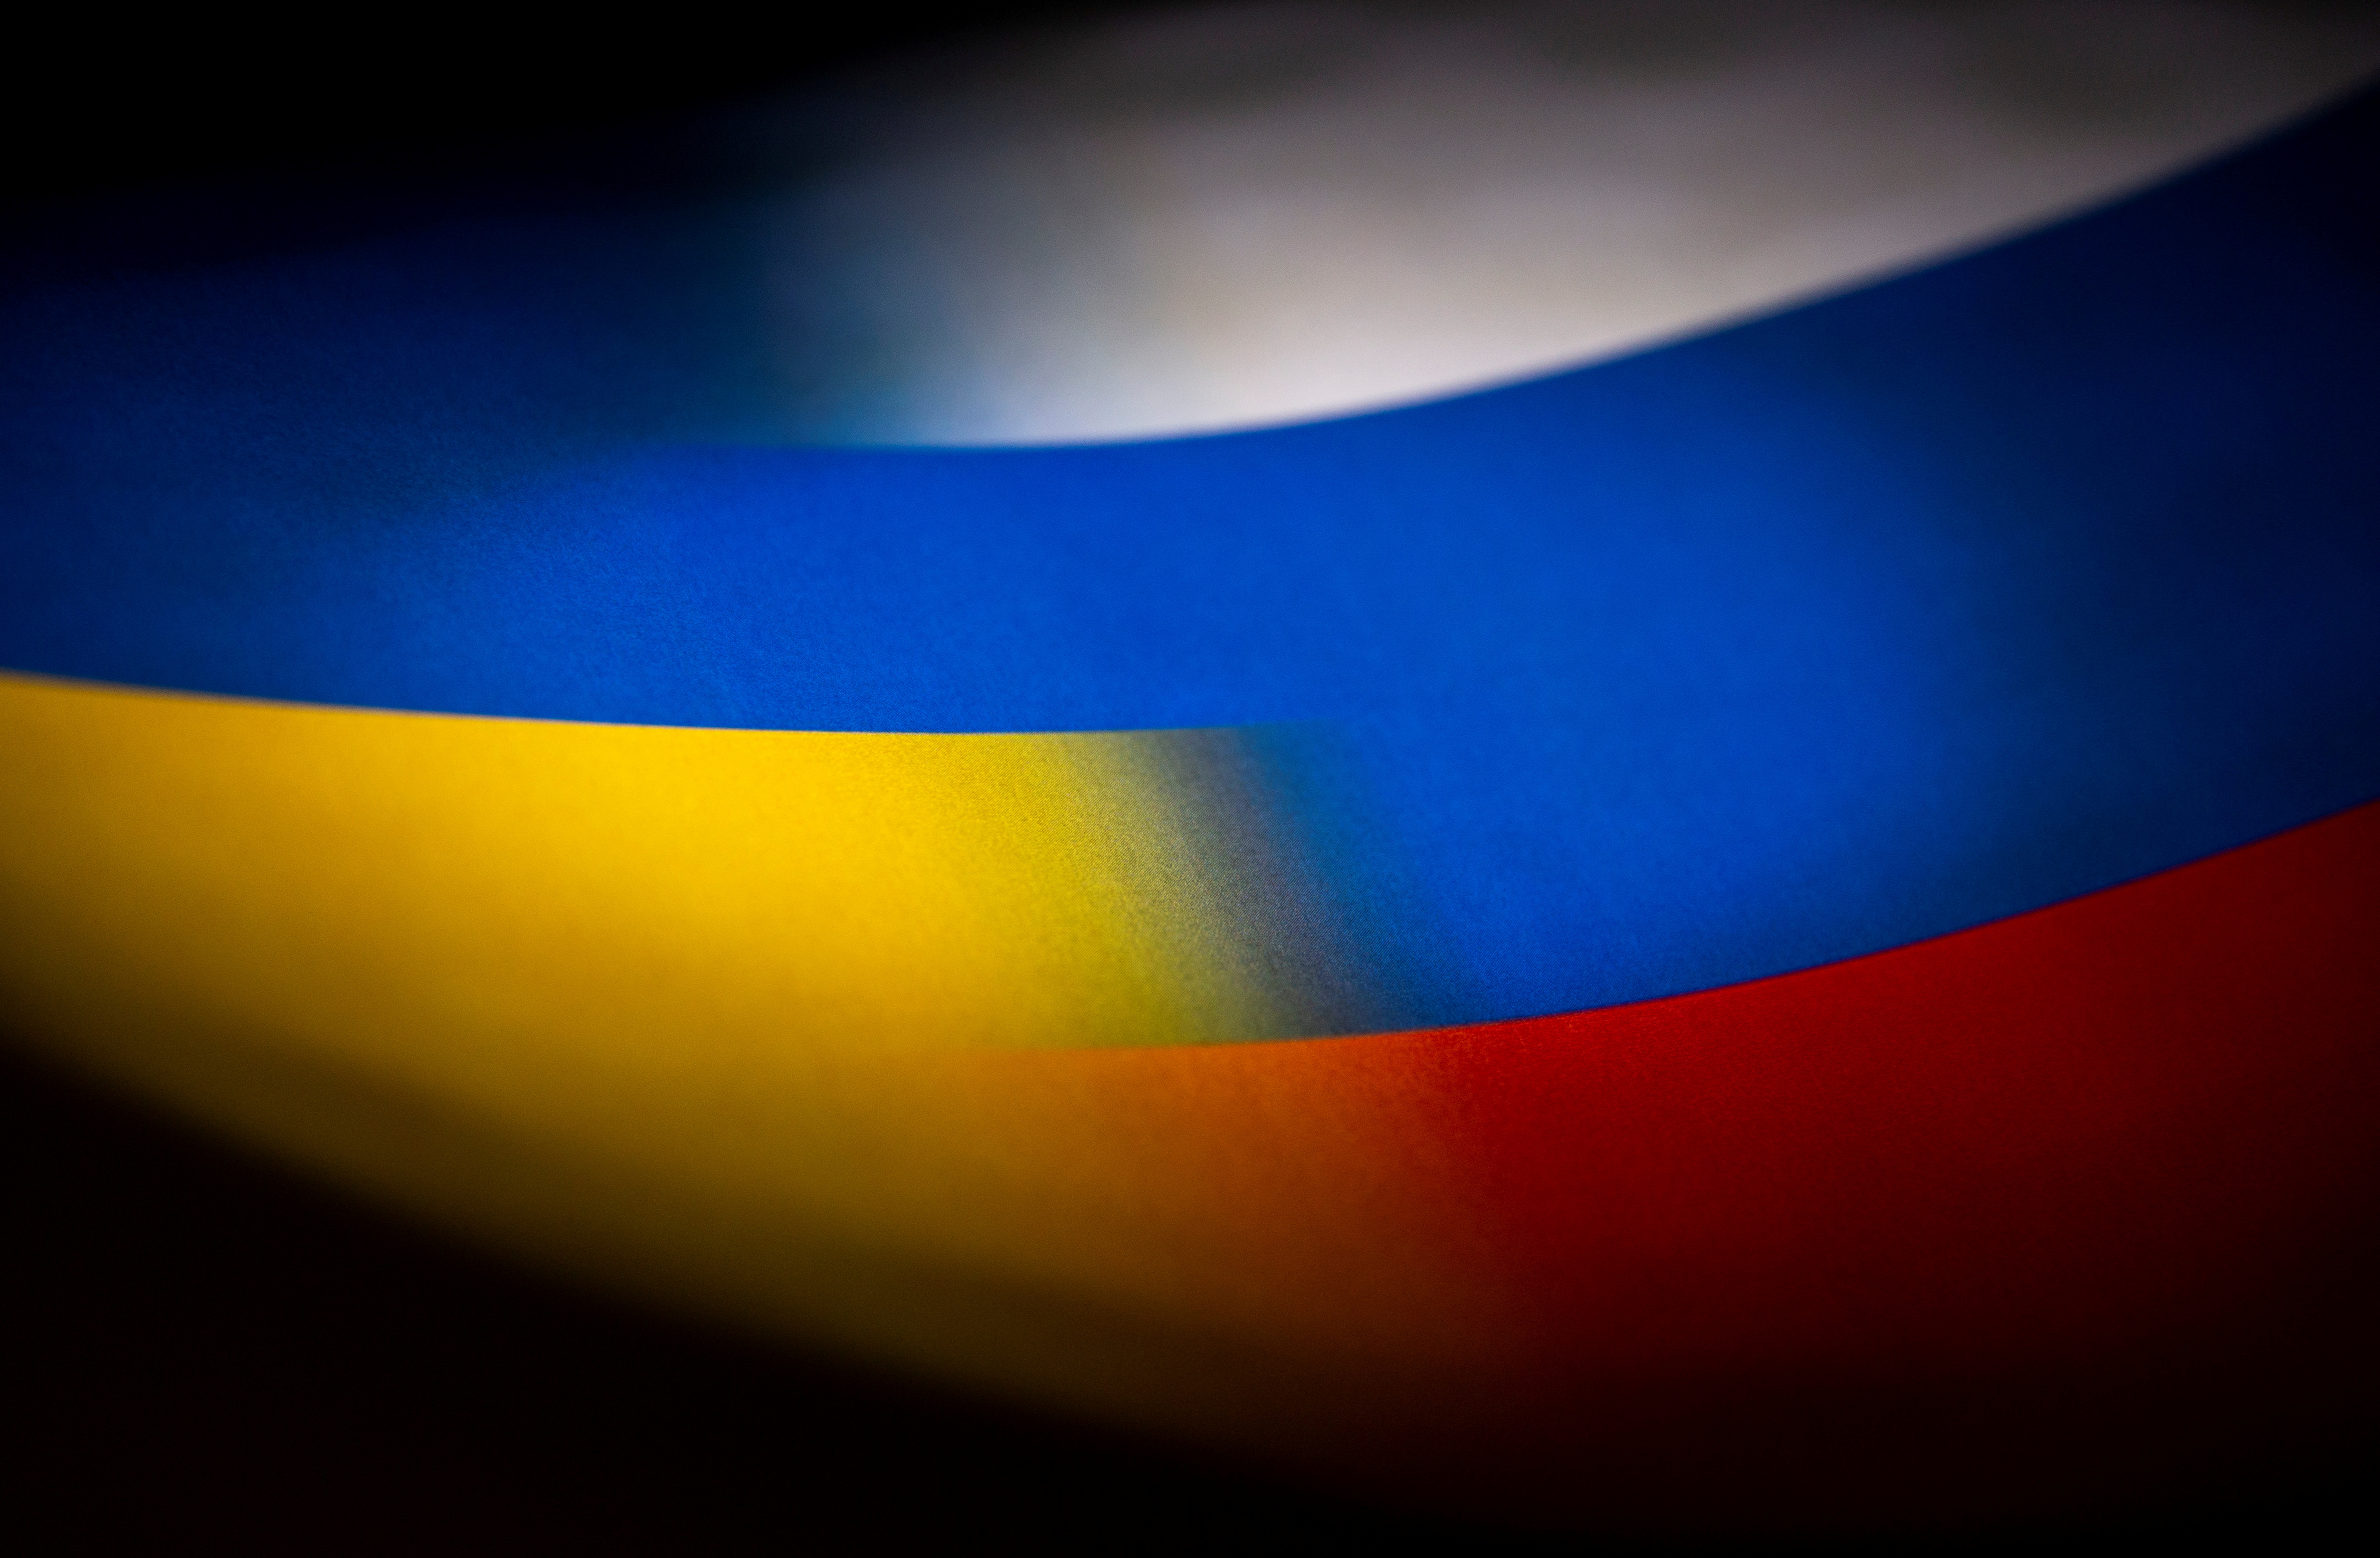 Illustration shows Russia's and Ukraine's flags